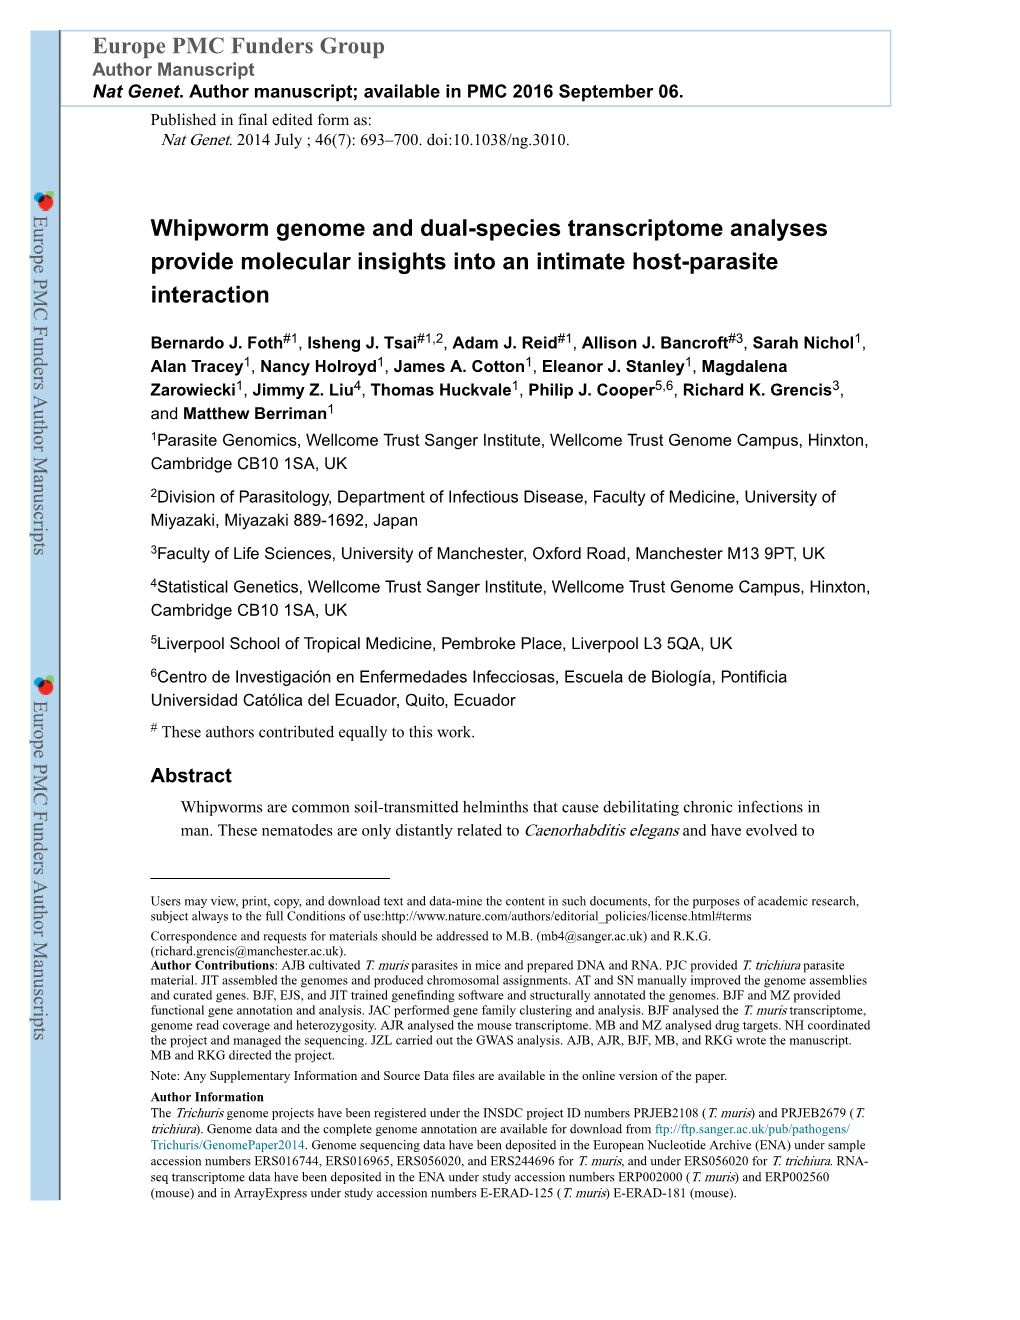 Whipworm Genome and Dual-Species Transcriptome Analyses Provide Molecular Insights Into an Intimate Host-Parasite Interaction